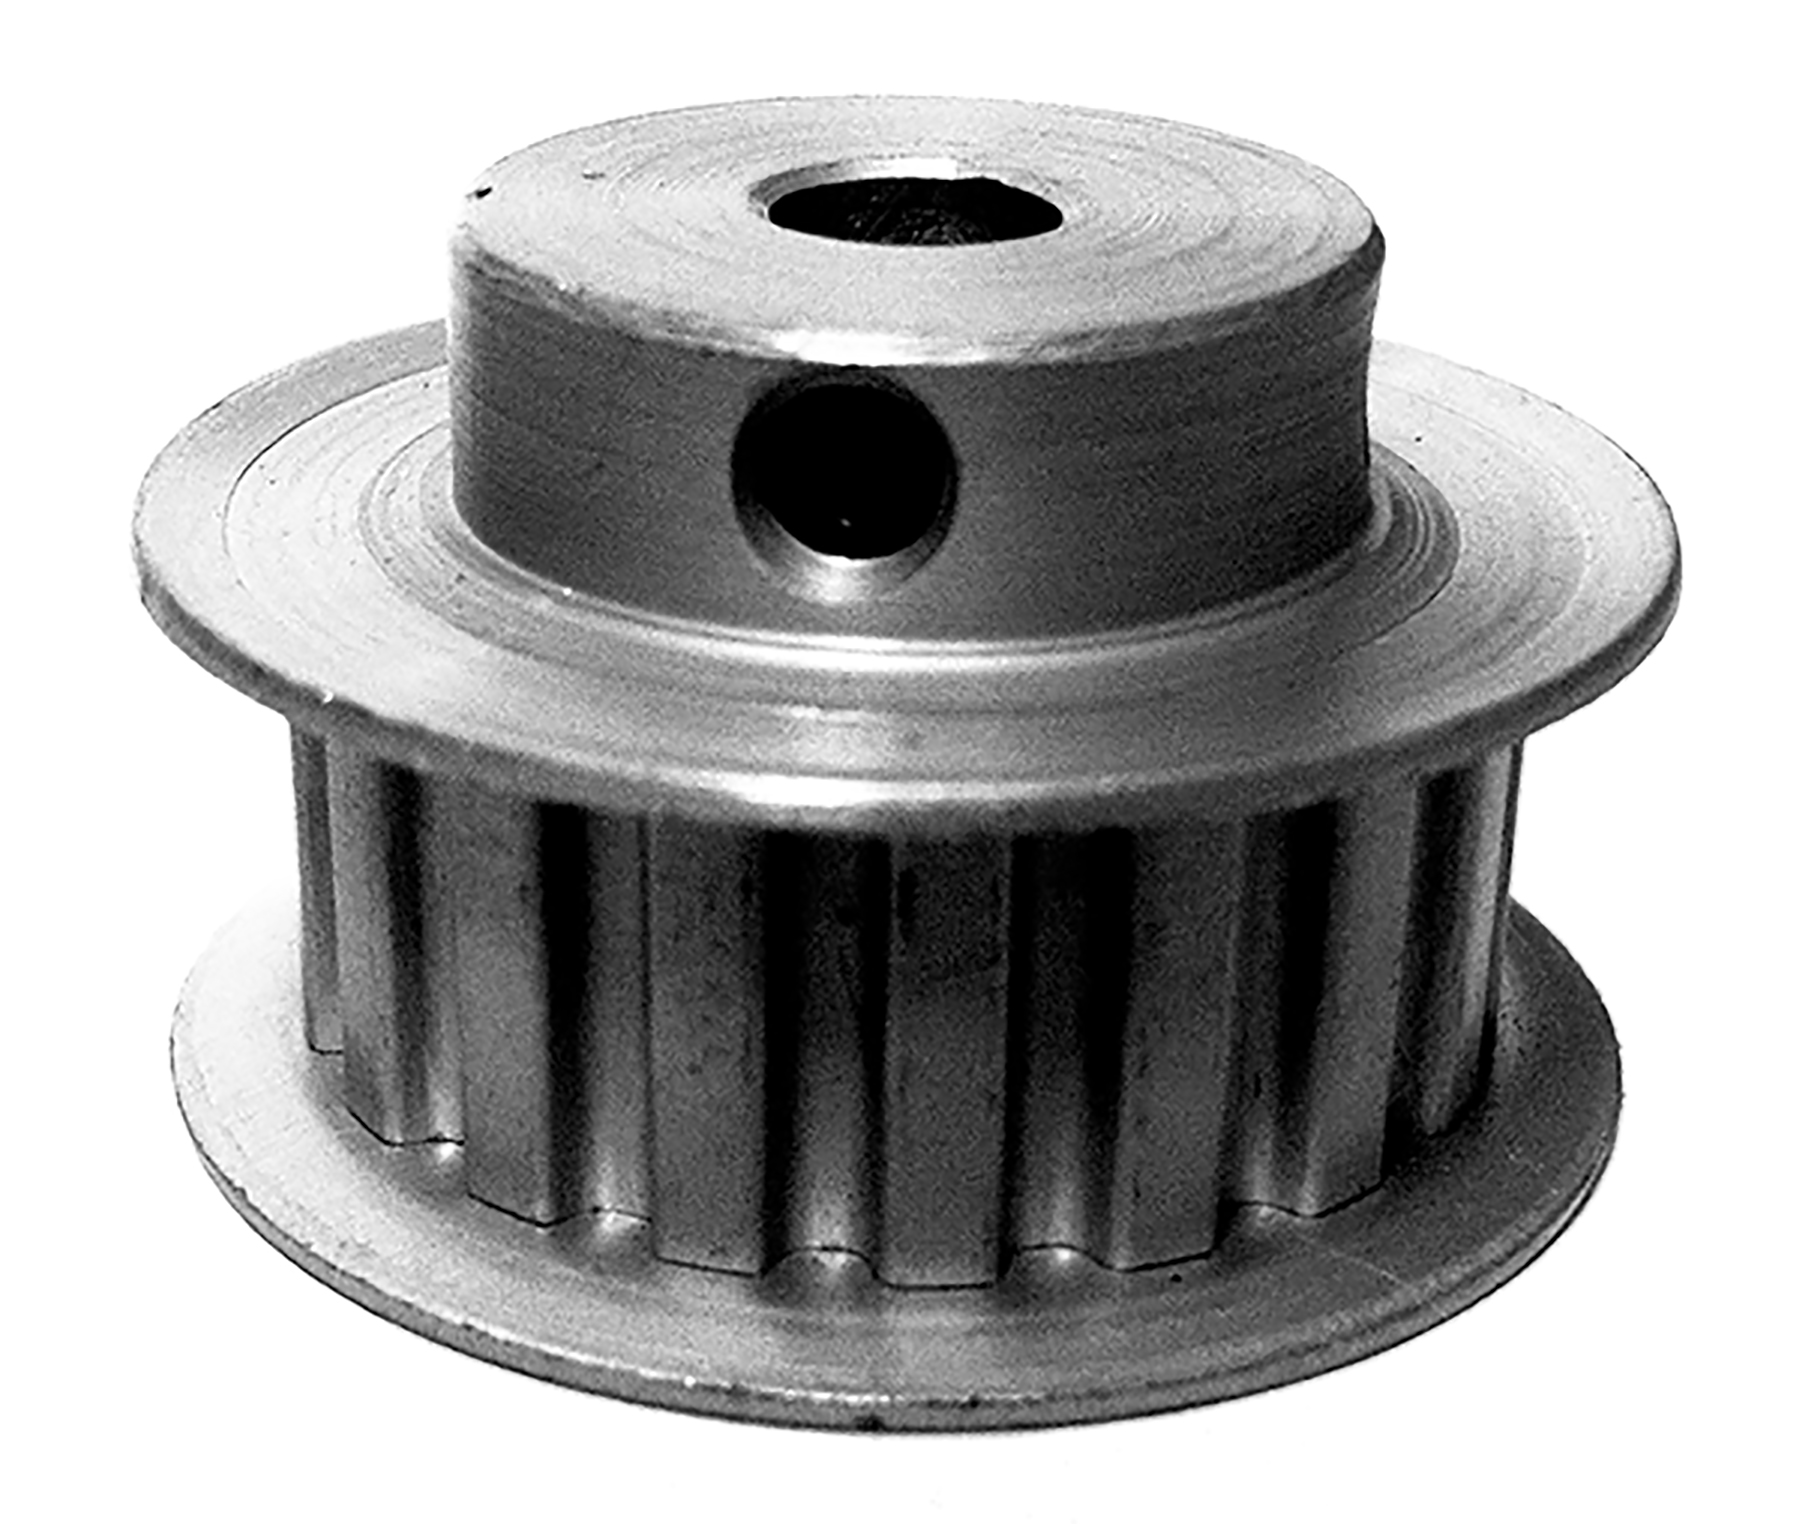 17XL037-6FA4 - Aluminum Imperial Pitch Pulleys